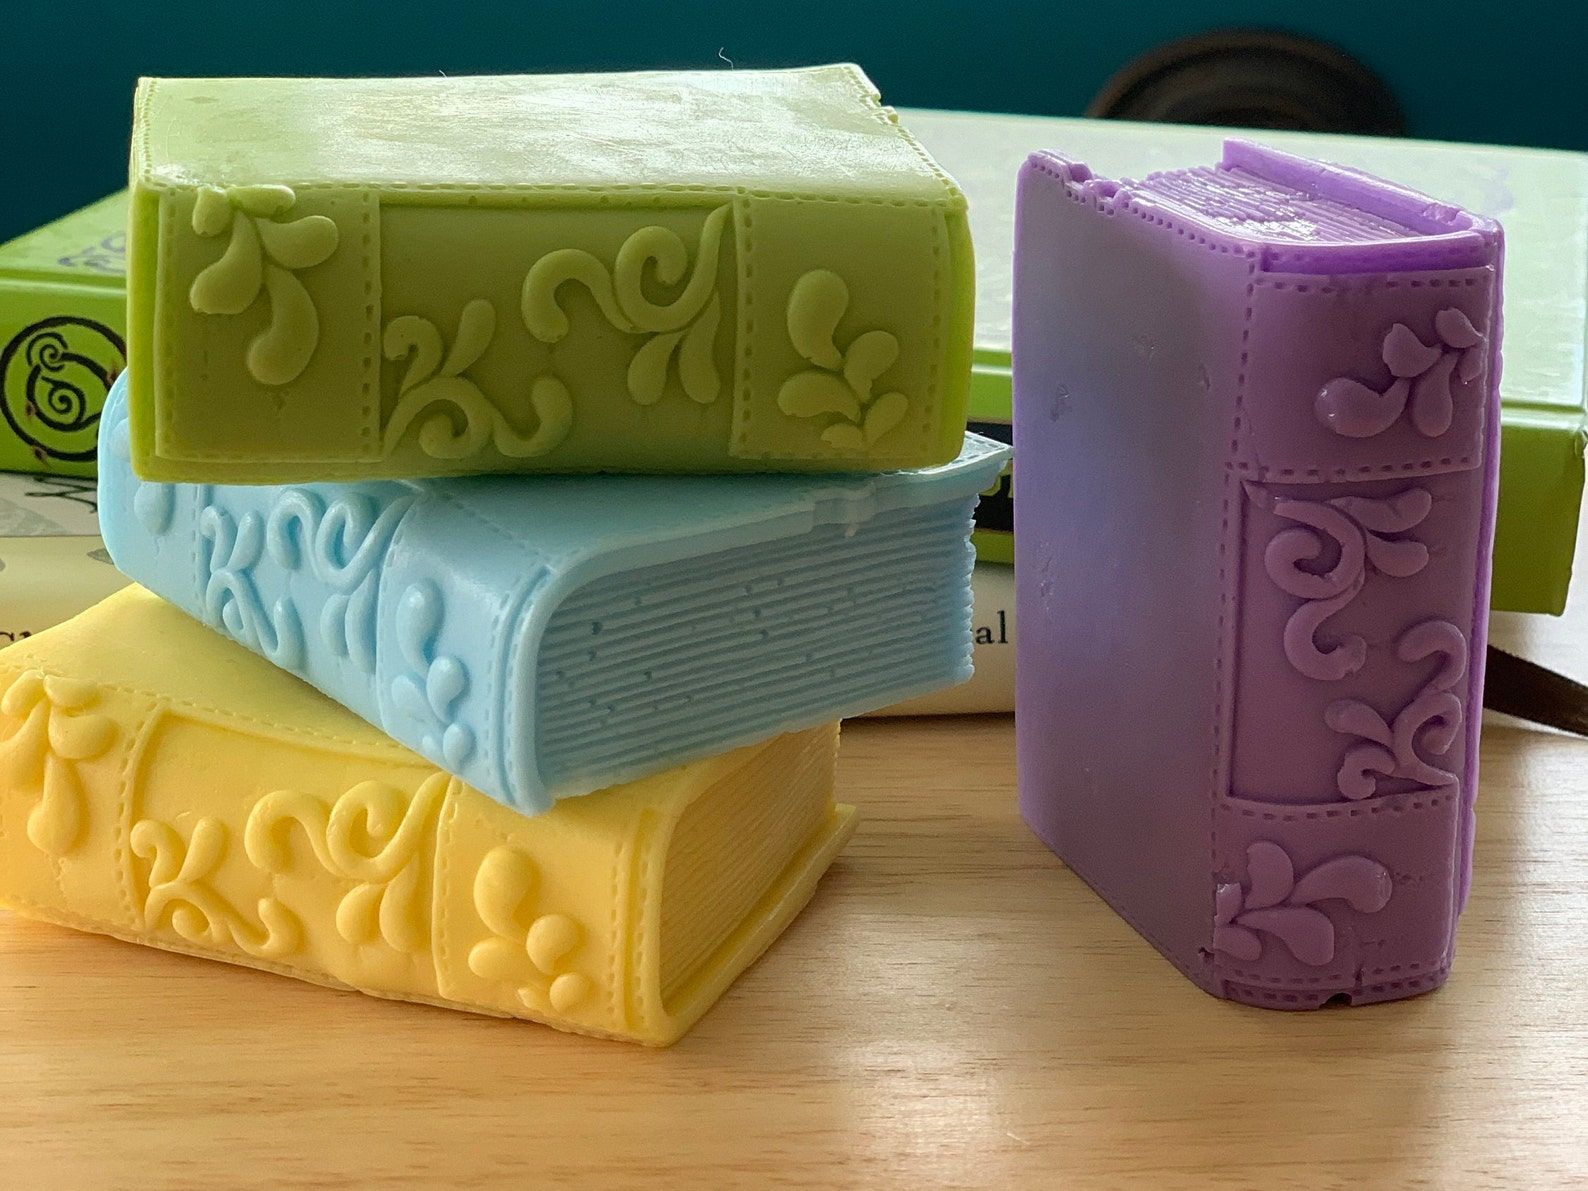 Four book-shape soap bars in yellow, blue, green, and purple. 